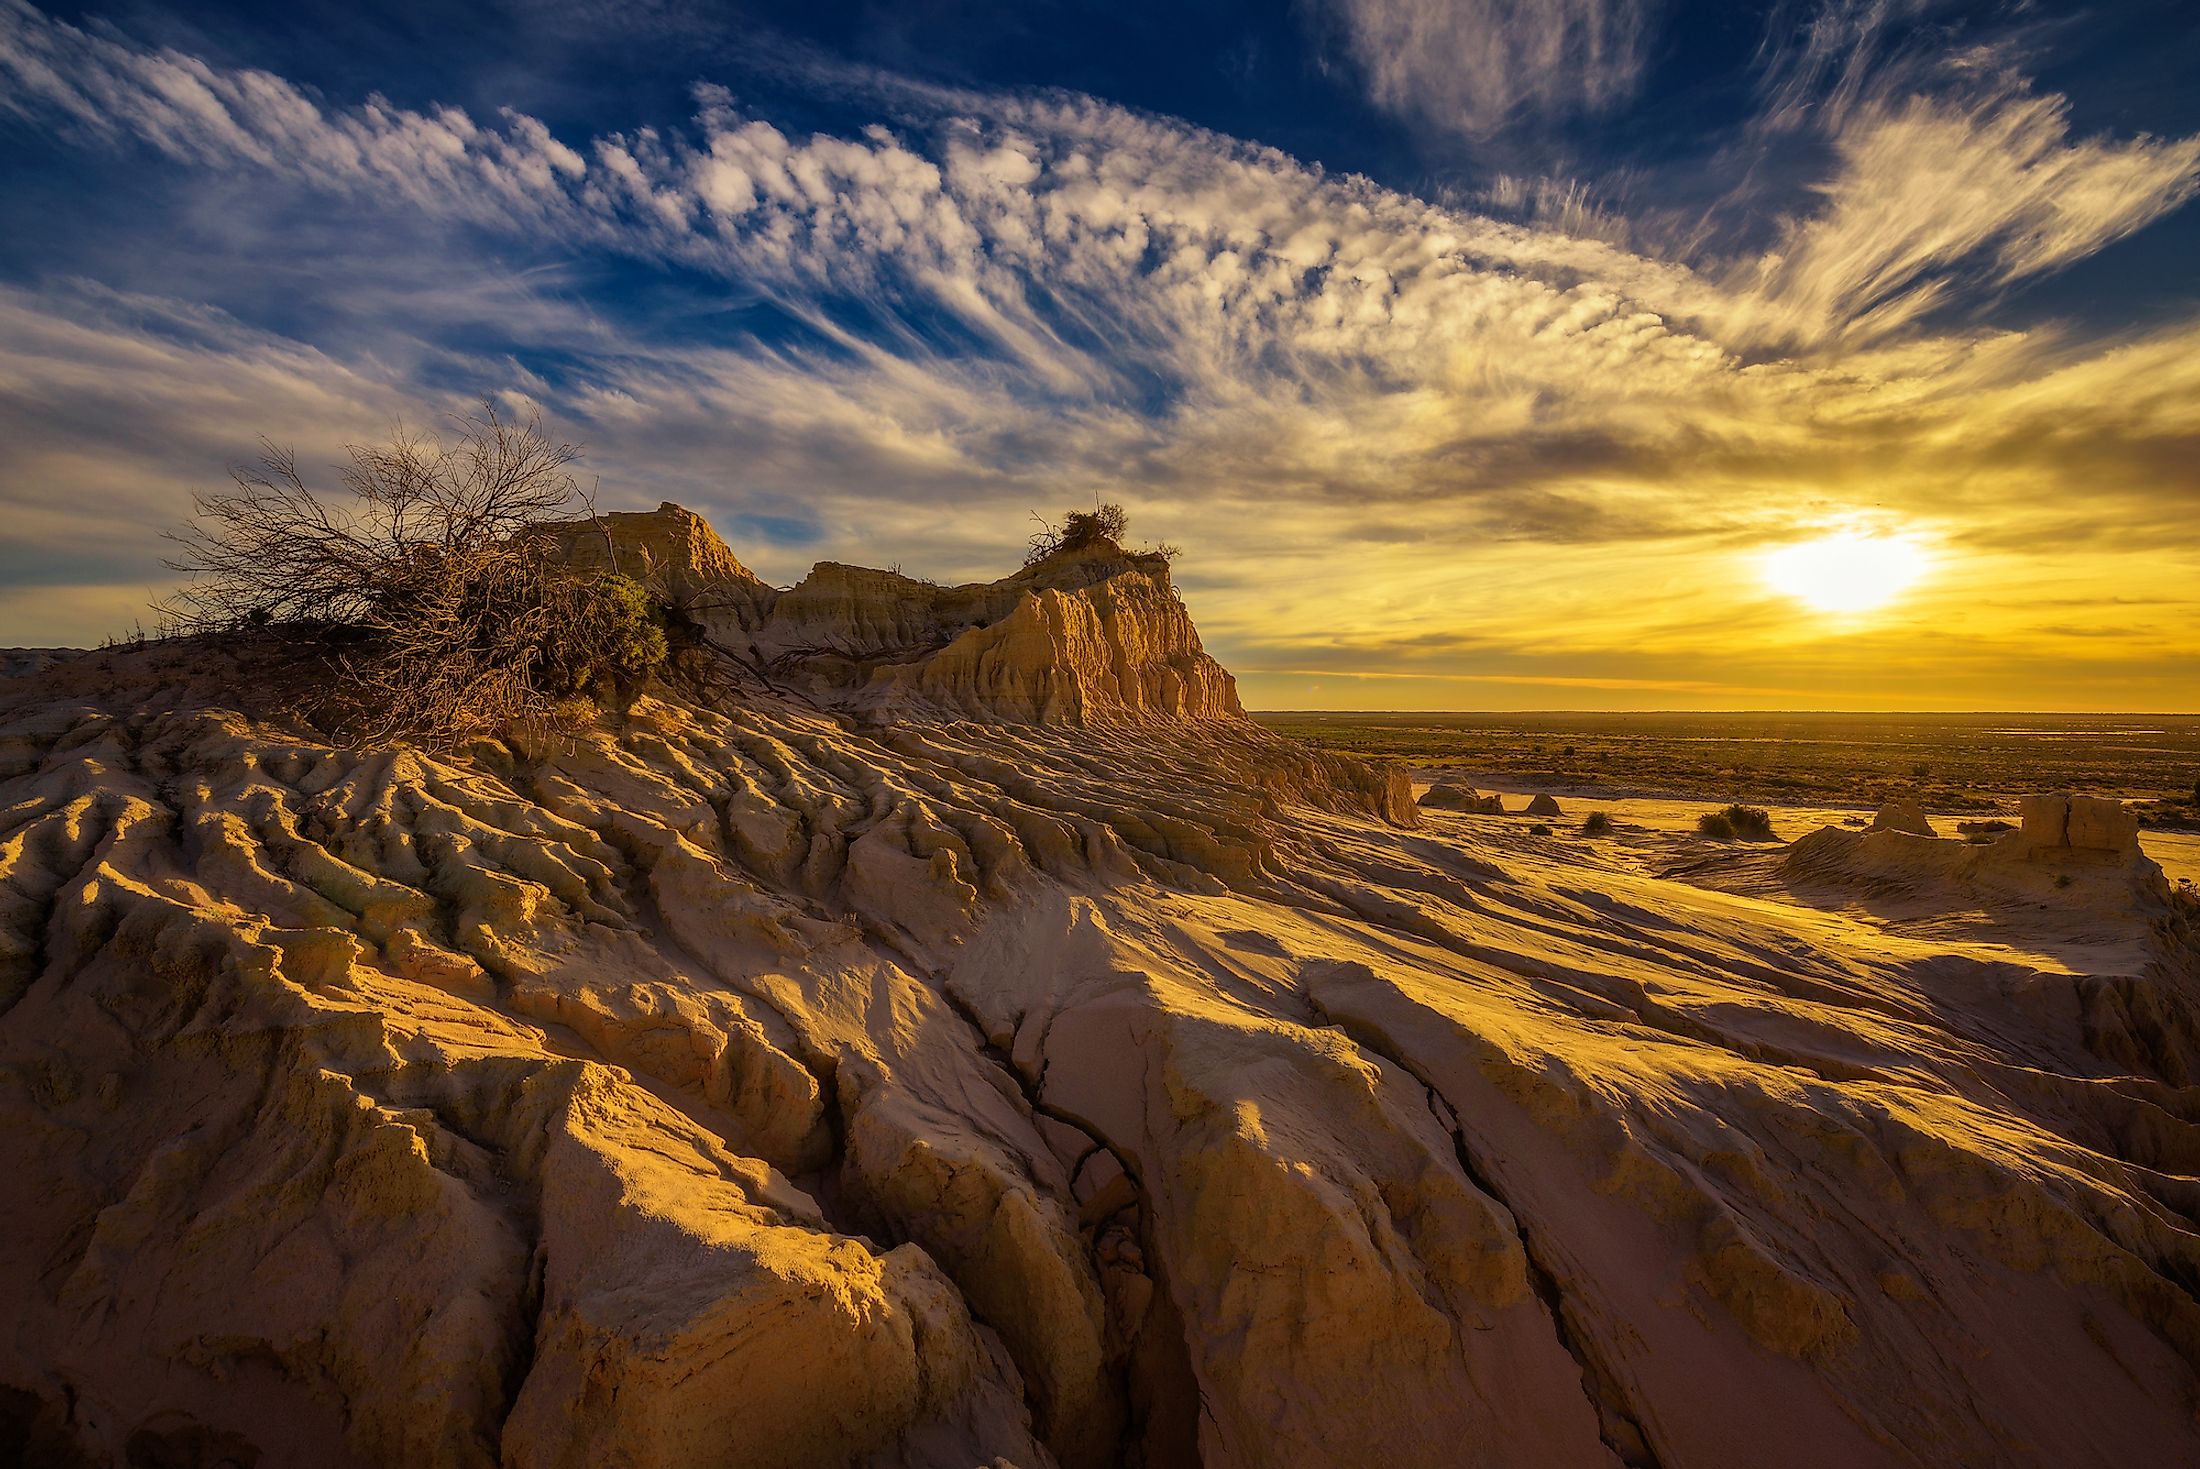 Dramatic sunset over Walls of China in Mungo National Park, New South Wales, Australia.